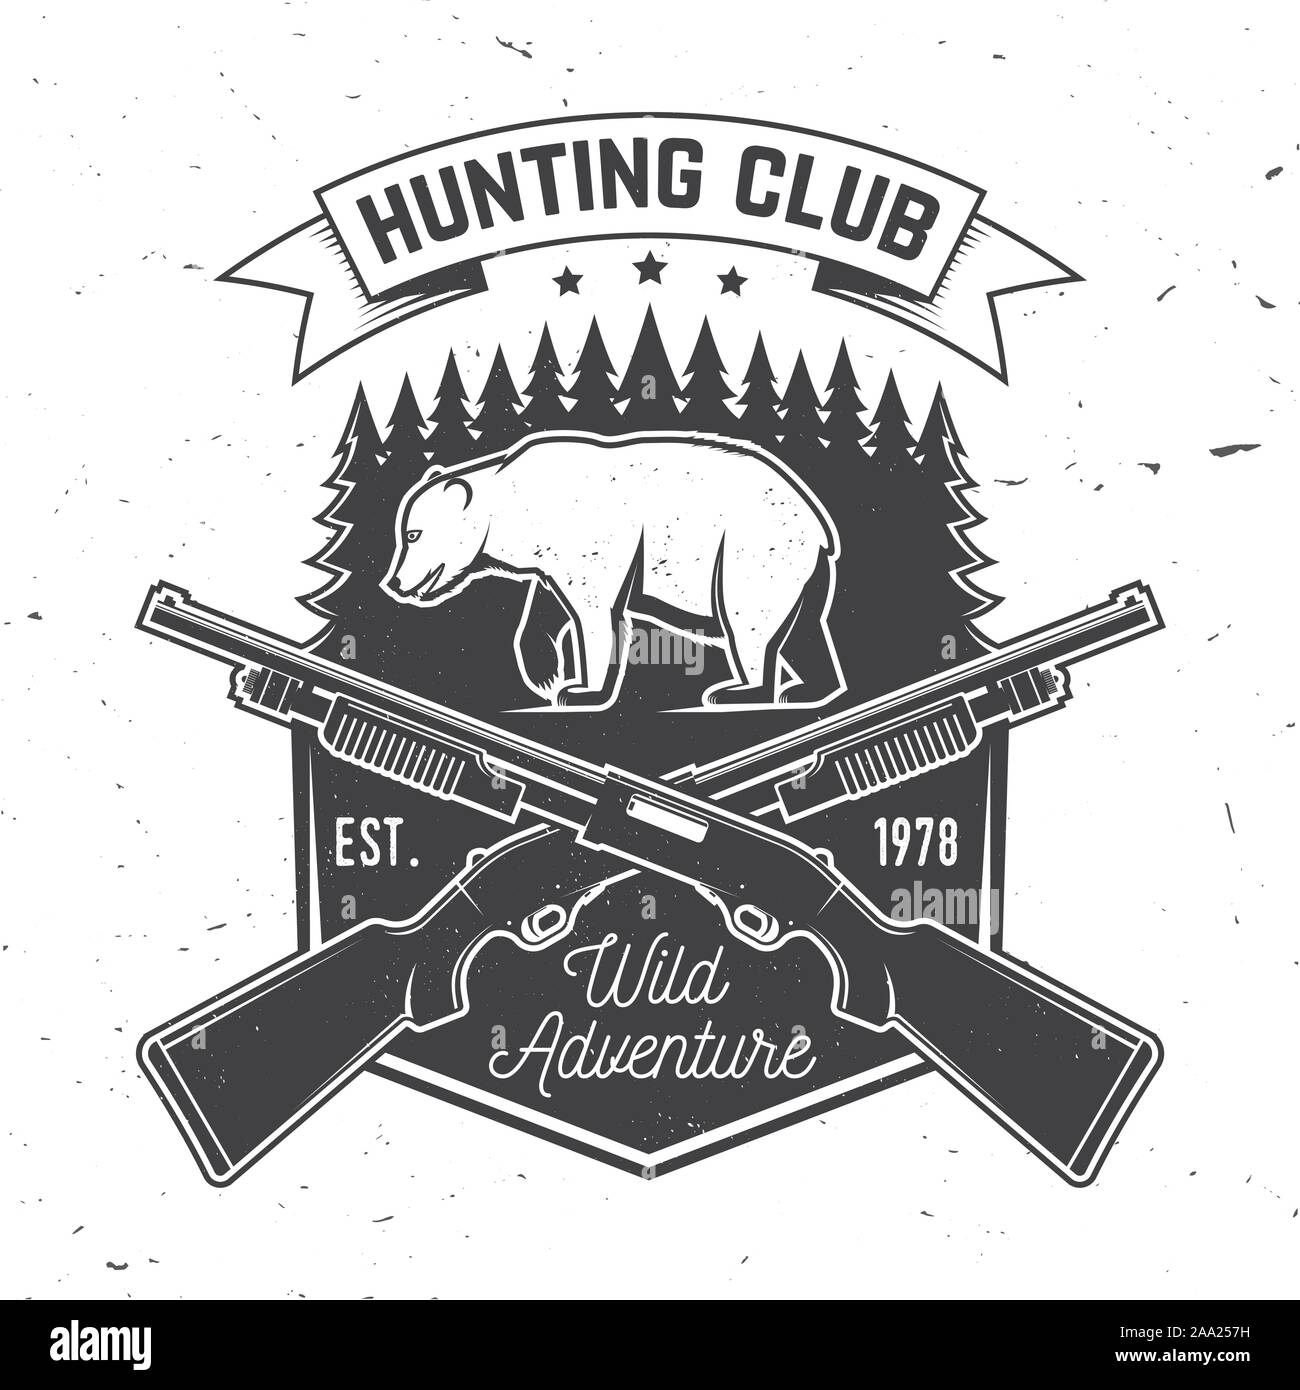 Hunting club. Vector. Concept for shirt or label, print, stamp or tee. Vintage typography design with hunting gun, bear and forest silhouette. Outdoor adventure hunt club emblem. Wild adventure. Stock Vector